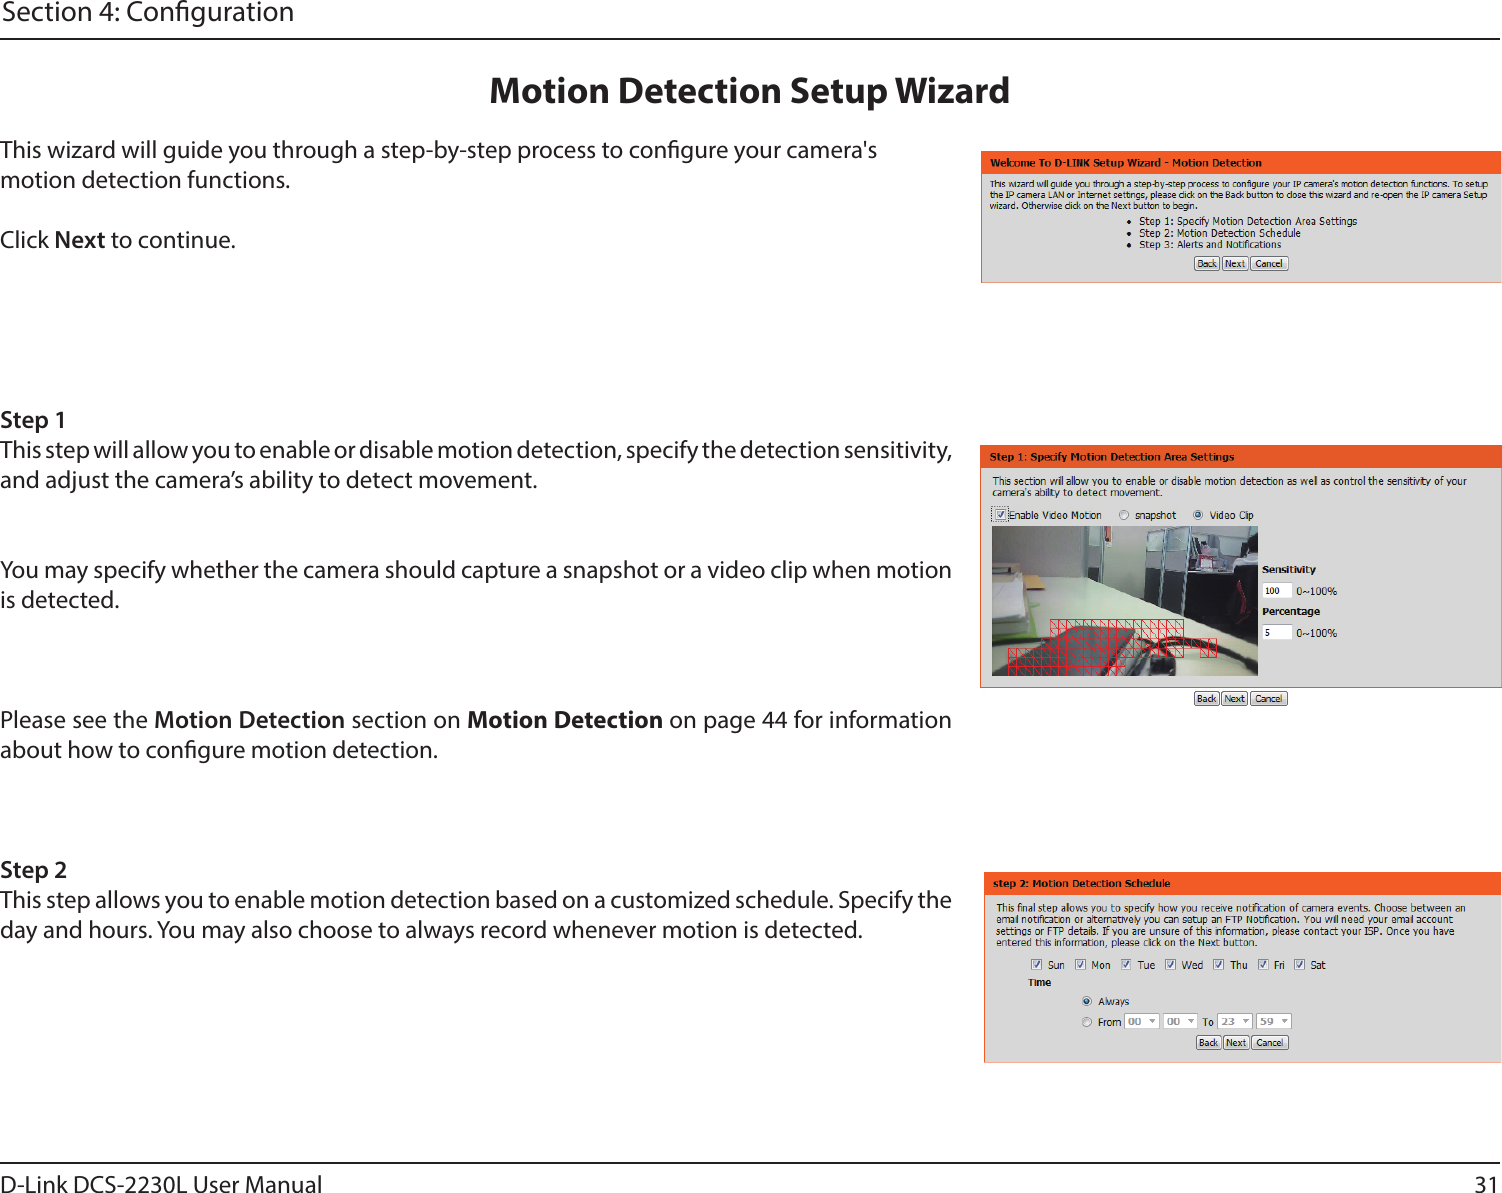 31D-Link DCS-2230L User ManualSection 4: CongurationThis wizard will guide you through a step-by-step process to congure your camera&apos;s motion detection functions.Click Next to continue.Step 1This step will allow you to enable or disable motion detection, specify the detection sensitivity, and adjust the camera’s ability to detect movement.You may specify whether the camera should capture a snapshot or a video clip when motion is detected.Please see the Motion Detection section on Motion Detection on page 44 for information about how to congure motion detection.Step 2This step allows you to enable motion detection based on a customized schedule. Specify the day and hours. You may also choose to always record whenever motion is detected.Motion Detection Setup Wizard